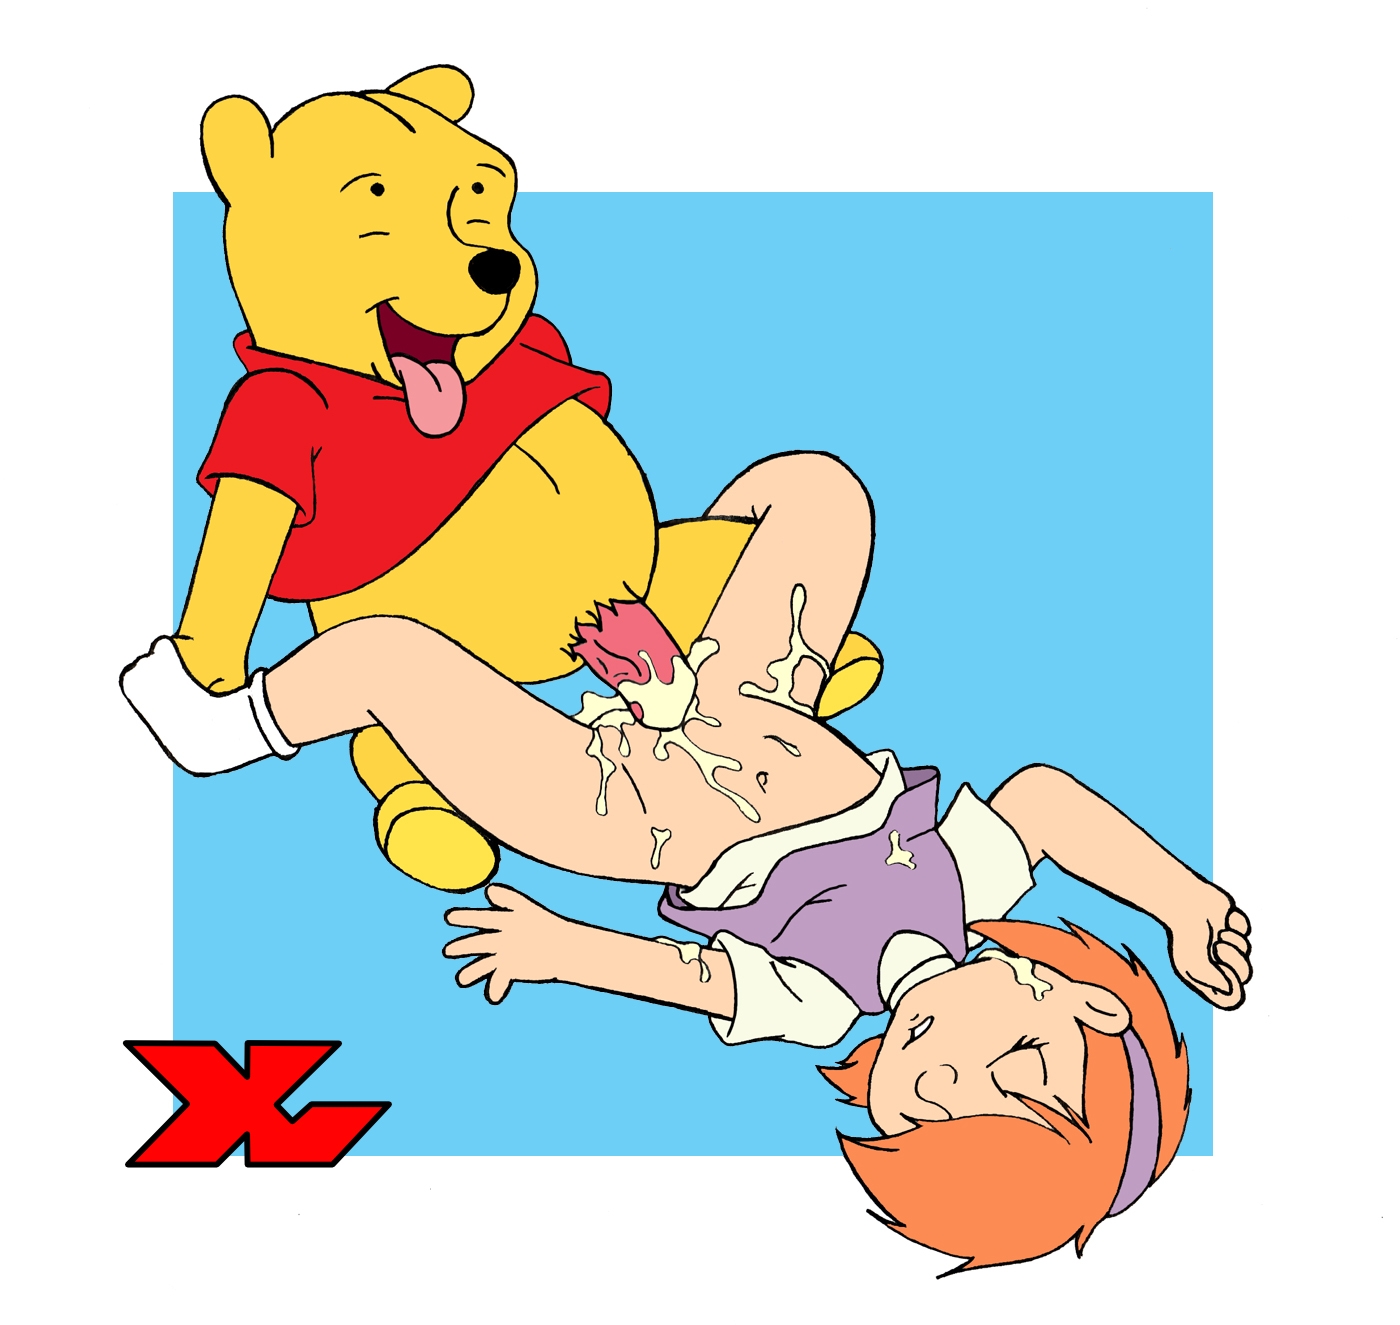 Winnie the pooh, sex toy edition